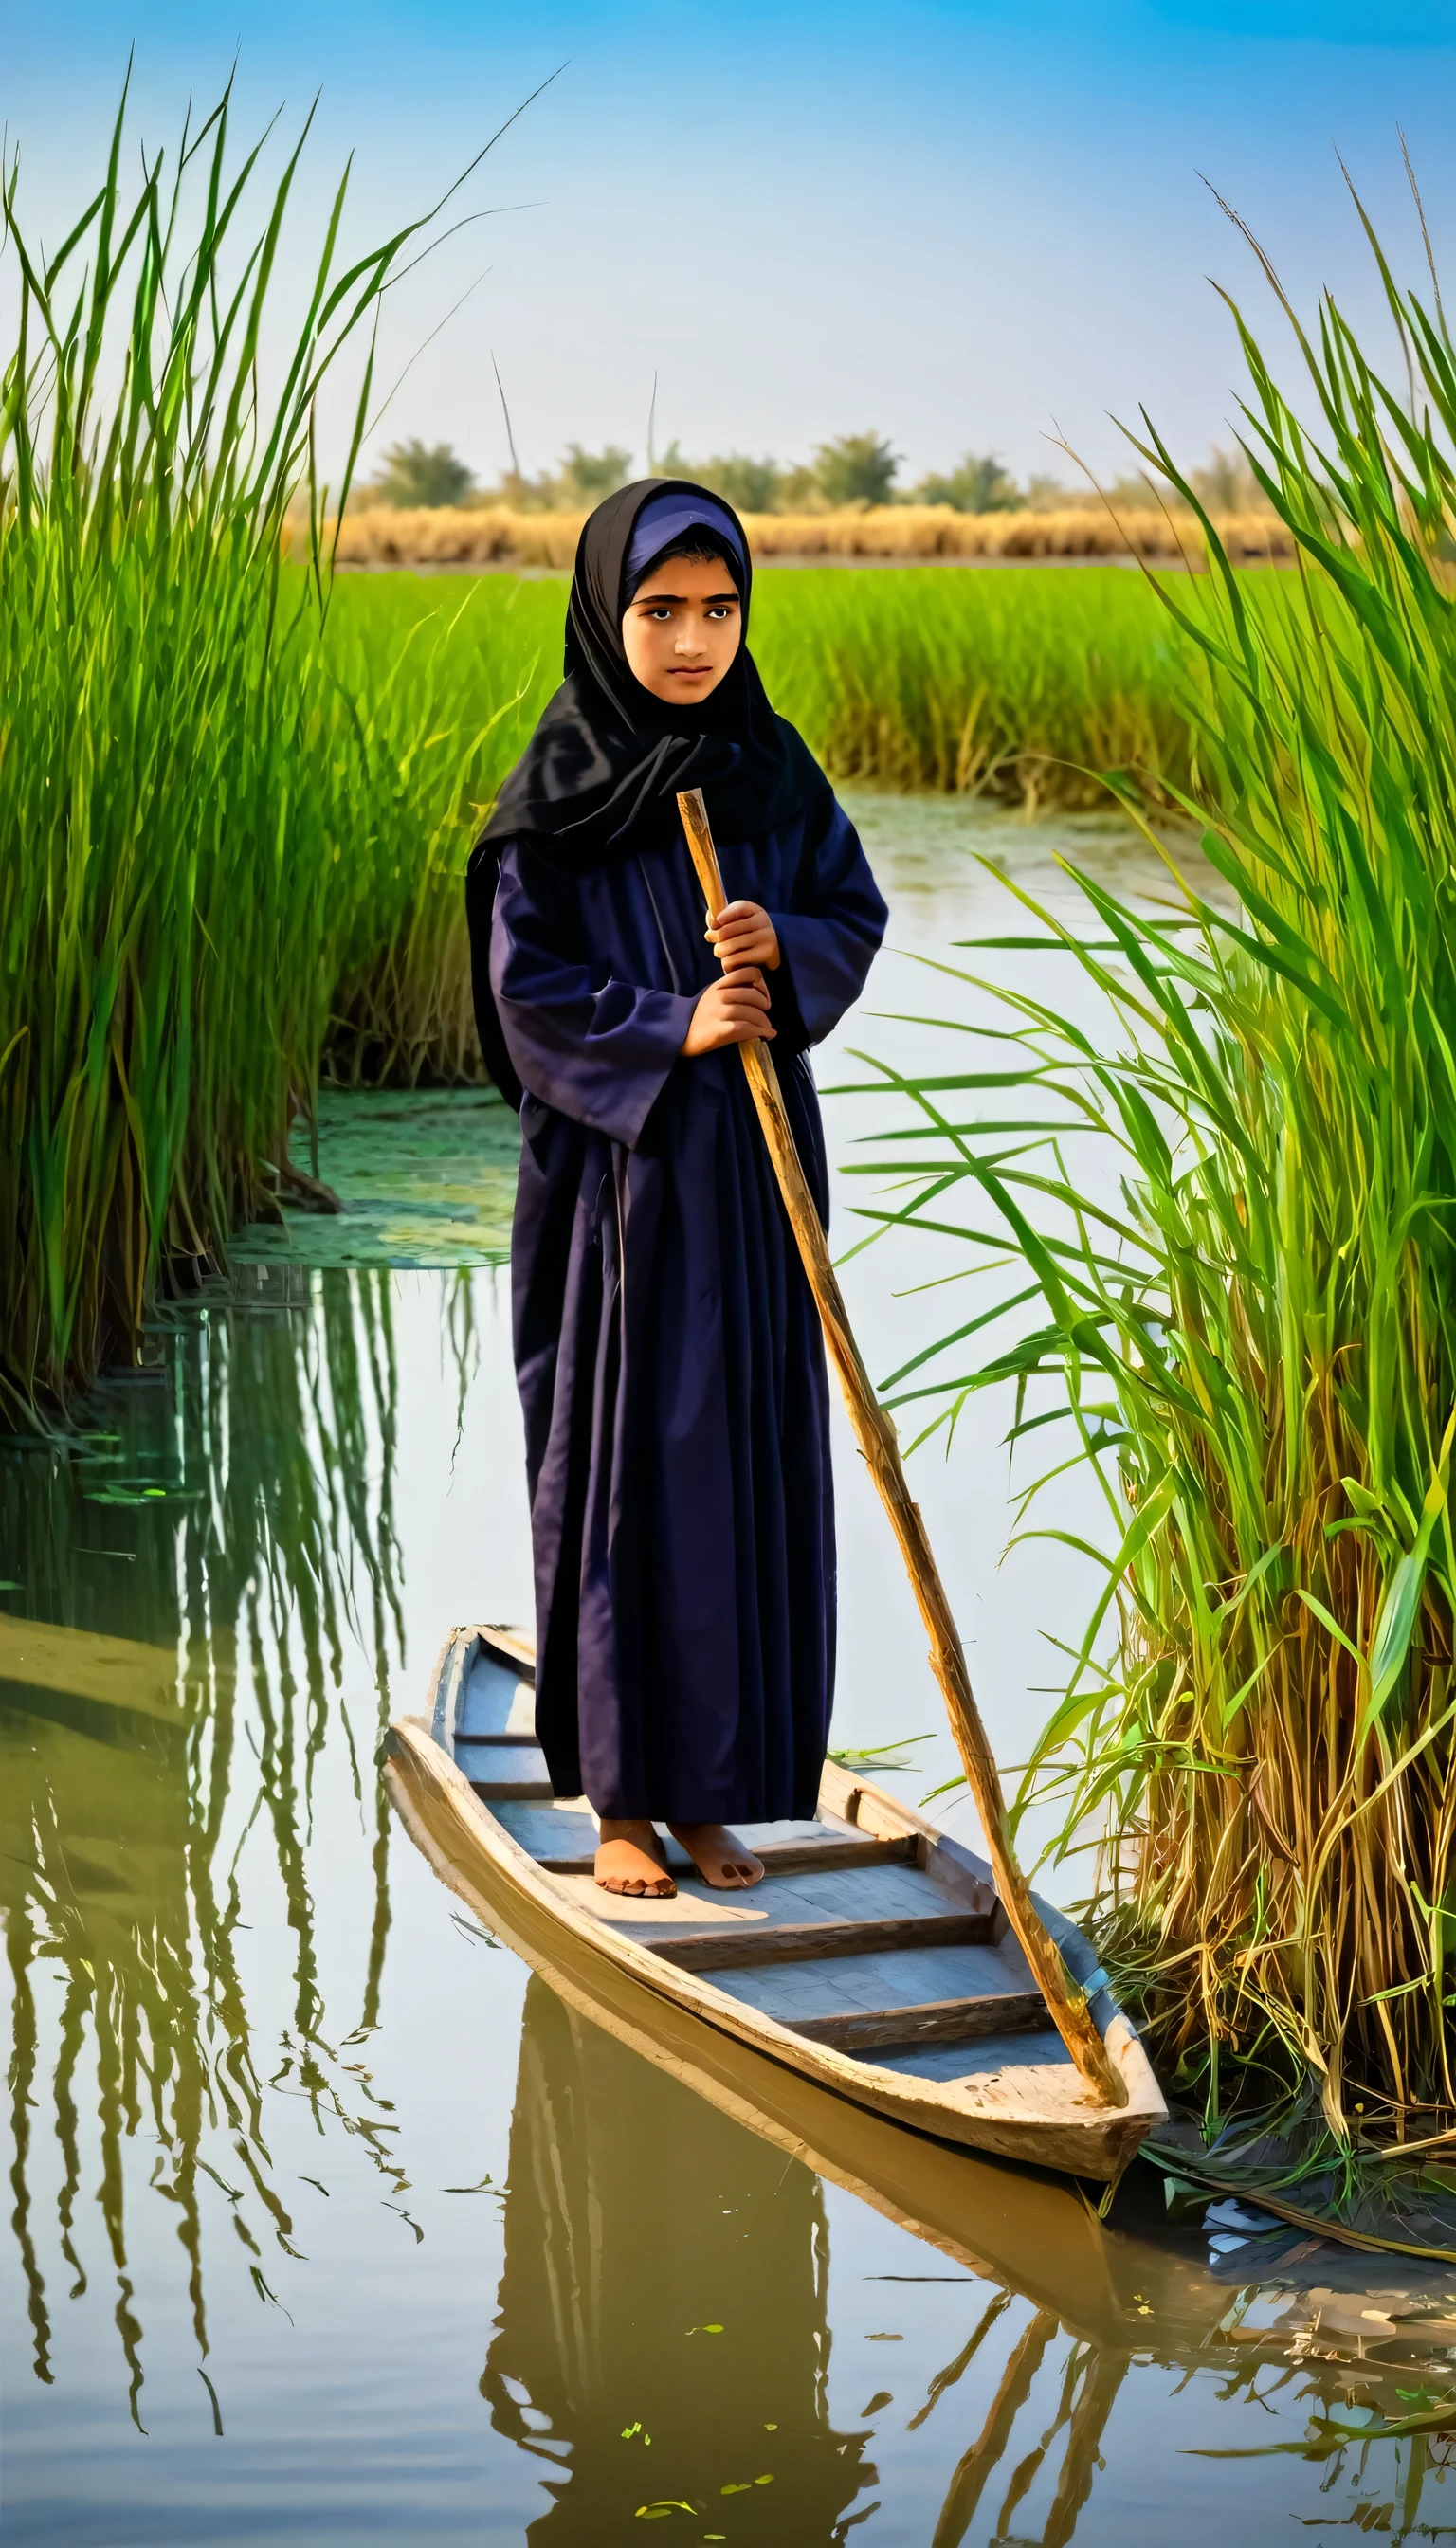 Iraqi 10-years old girl wearing a traditional robe in a boat and holding a stick in a swamp, Southern Iraq, marshes, traditional boat, the surroundings include grass and reeds and plants, solo, black_hair, 1girl, girl_focus, black hijab, grass, realistic, holding, outdoors, standing, photo realistic, best quality, modern art, painting, drawing, watercolor, psychedelic colors